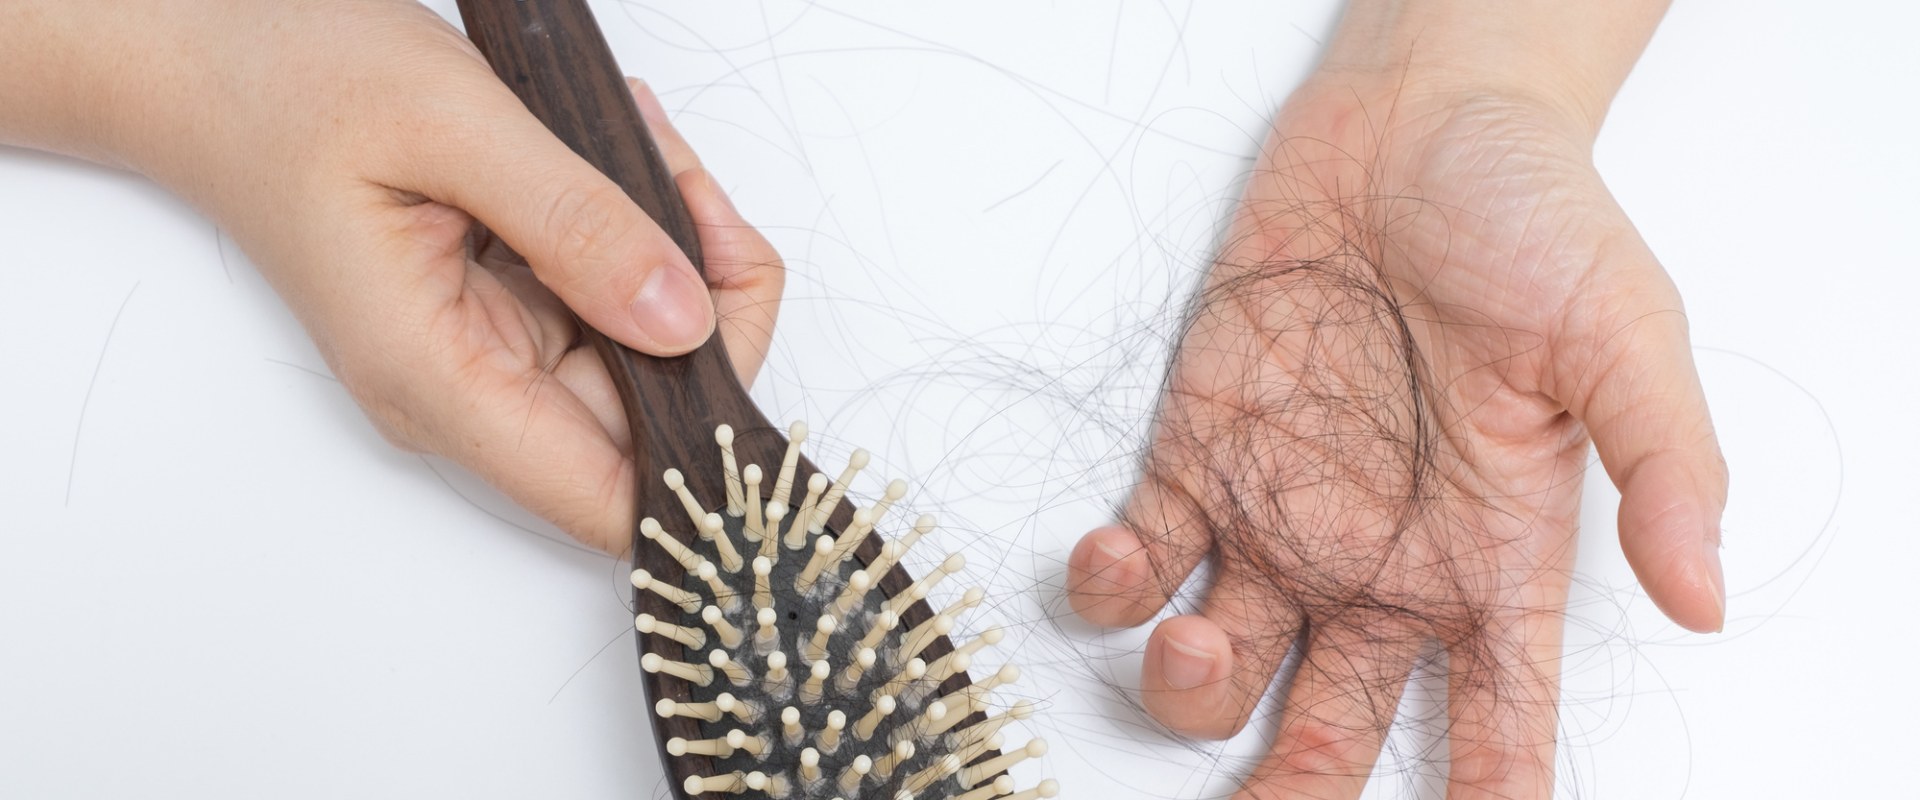 How can I prevent hair loss after losing weight?